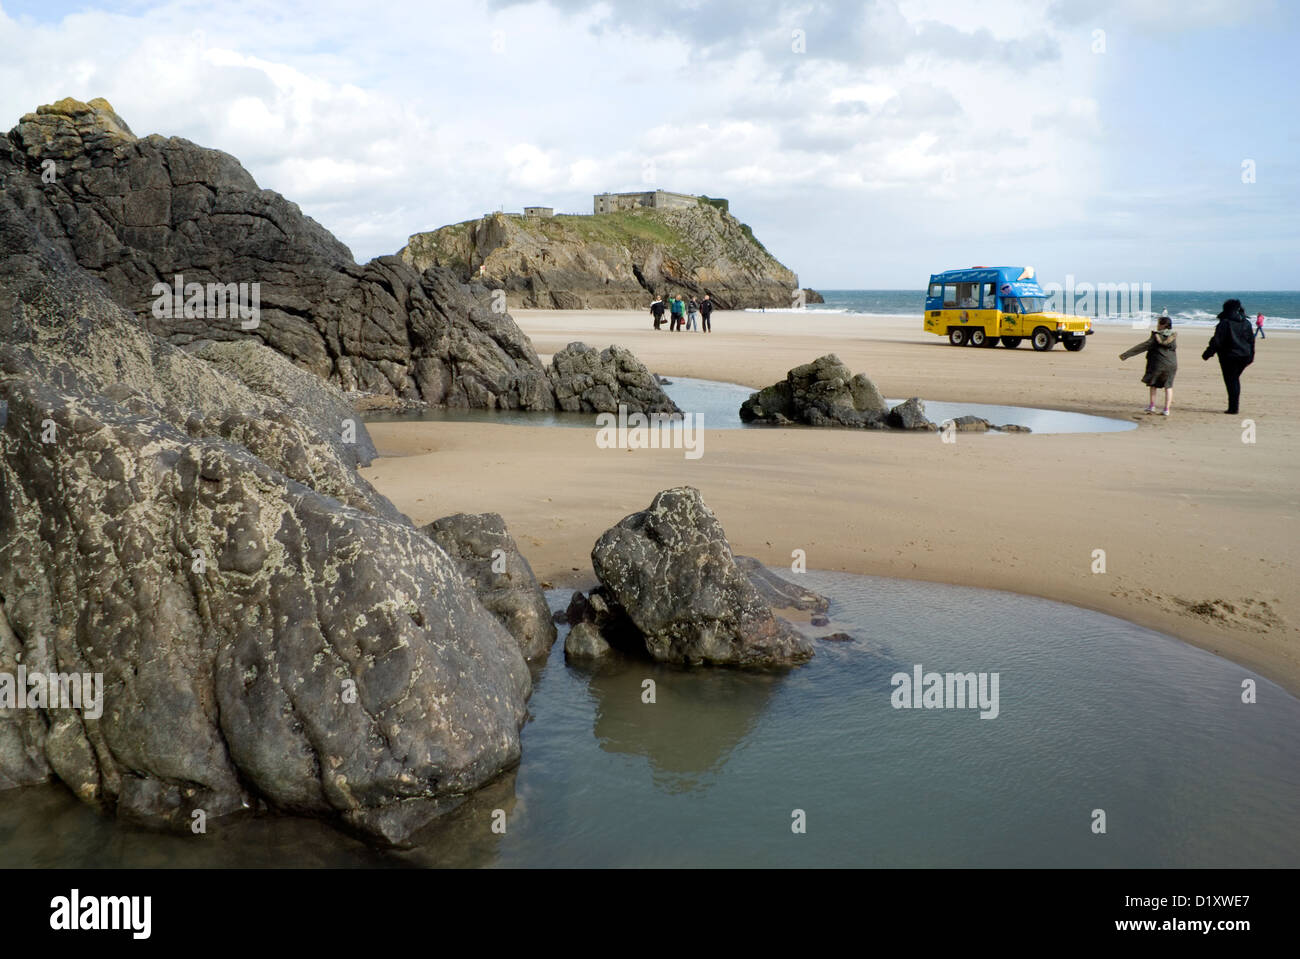 South Beach, Tenby, Pembrokeshire, West Wales. Stockfoto